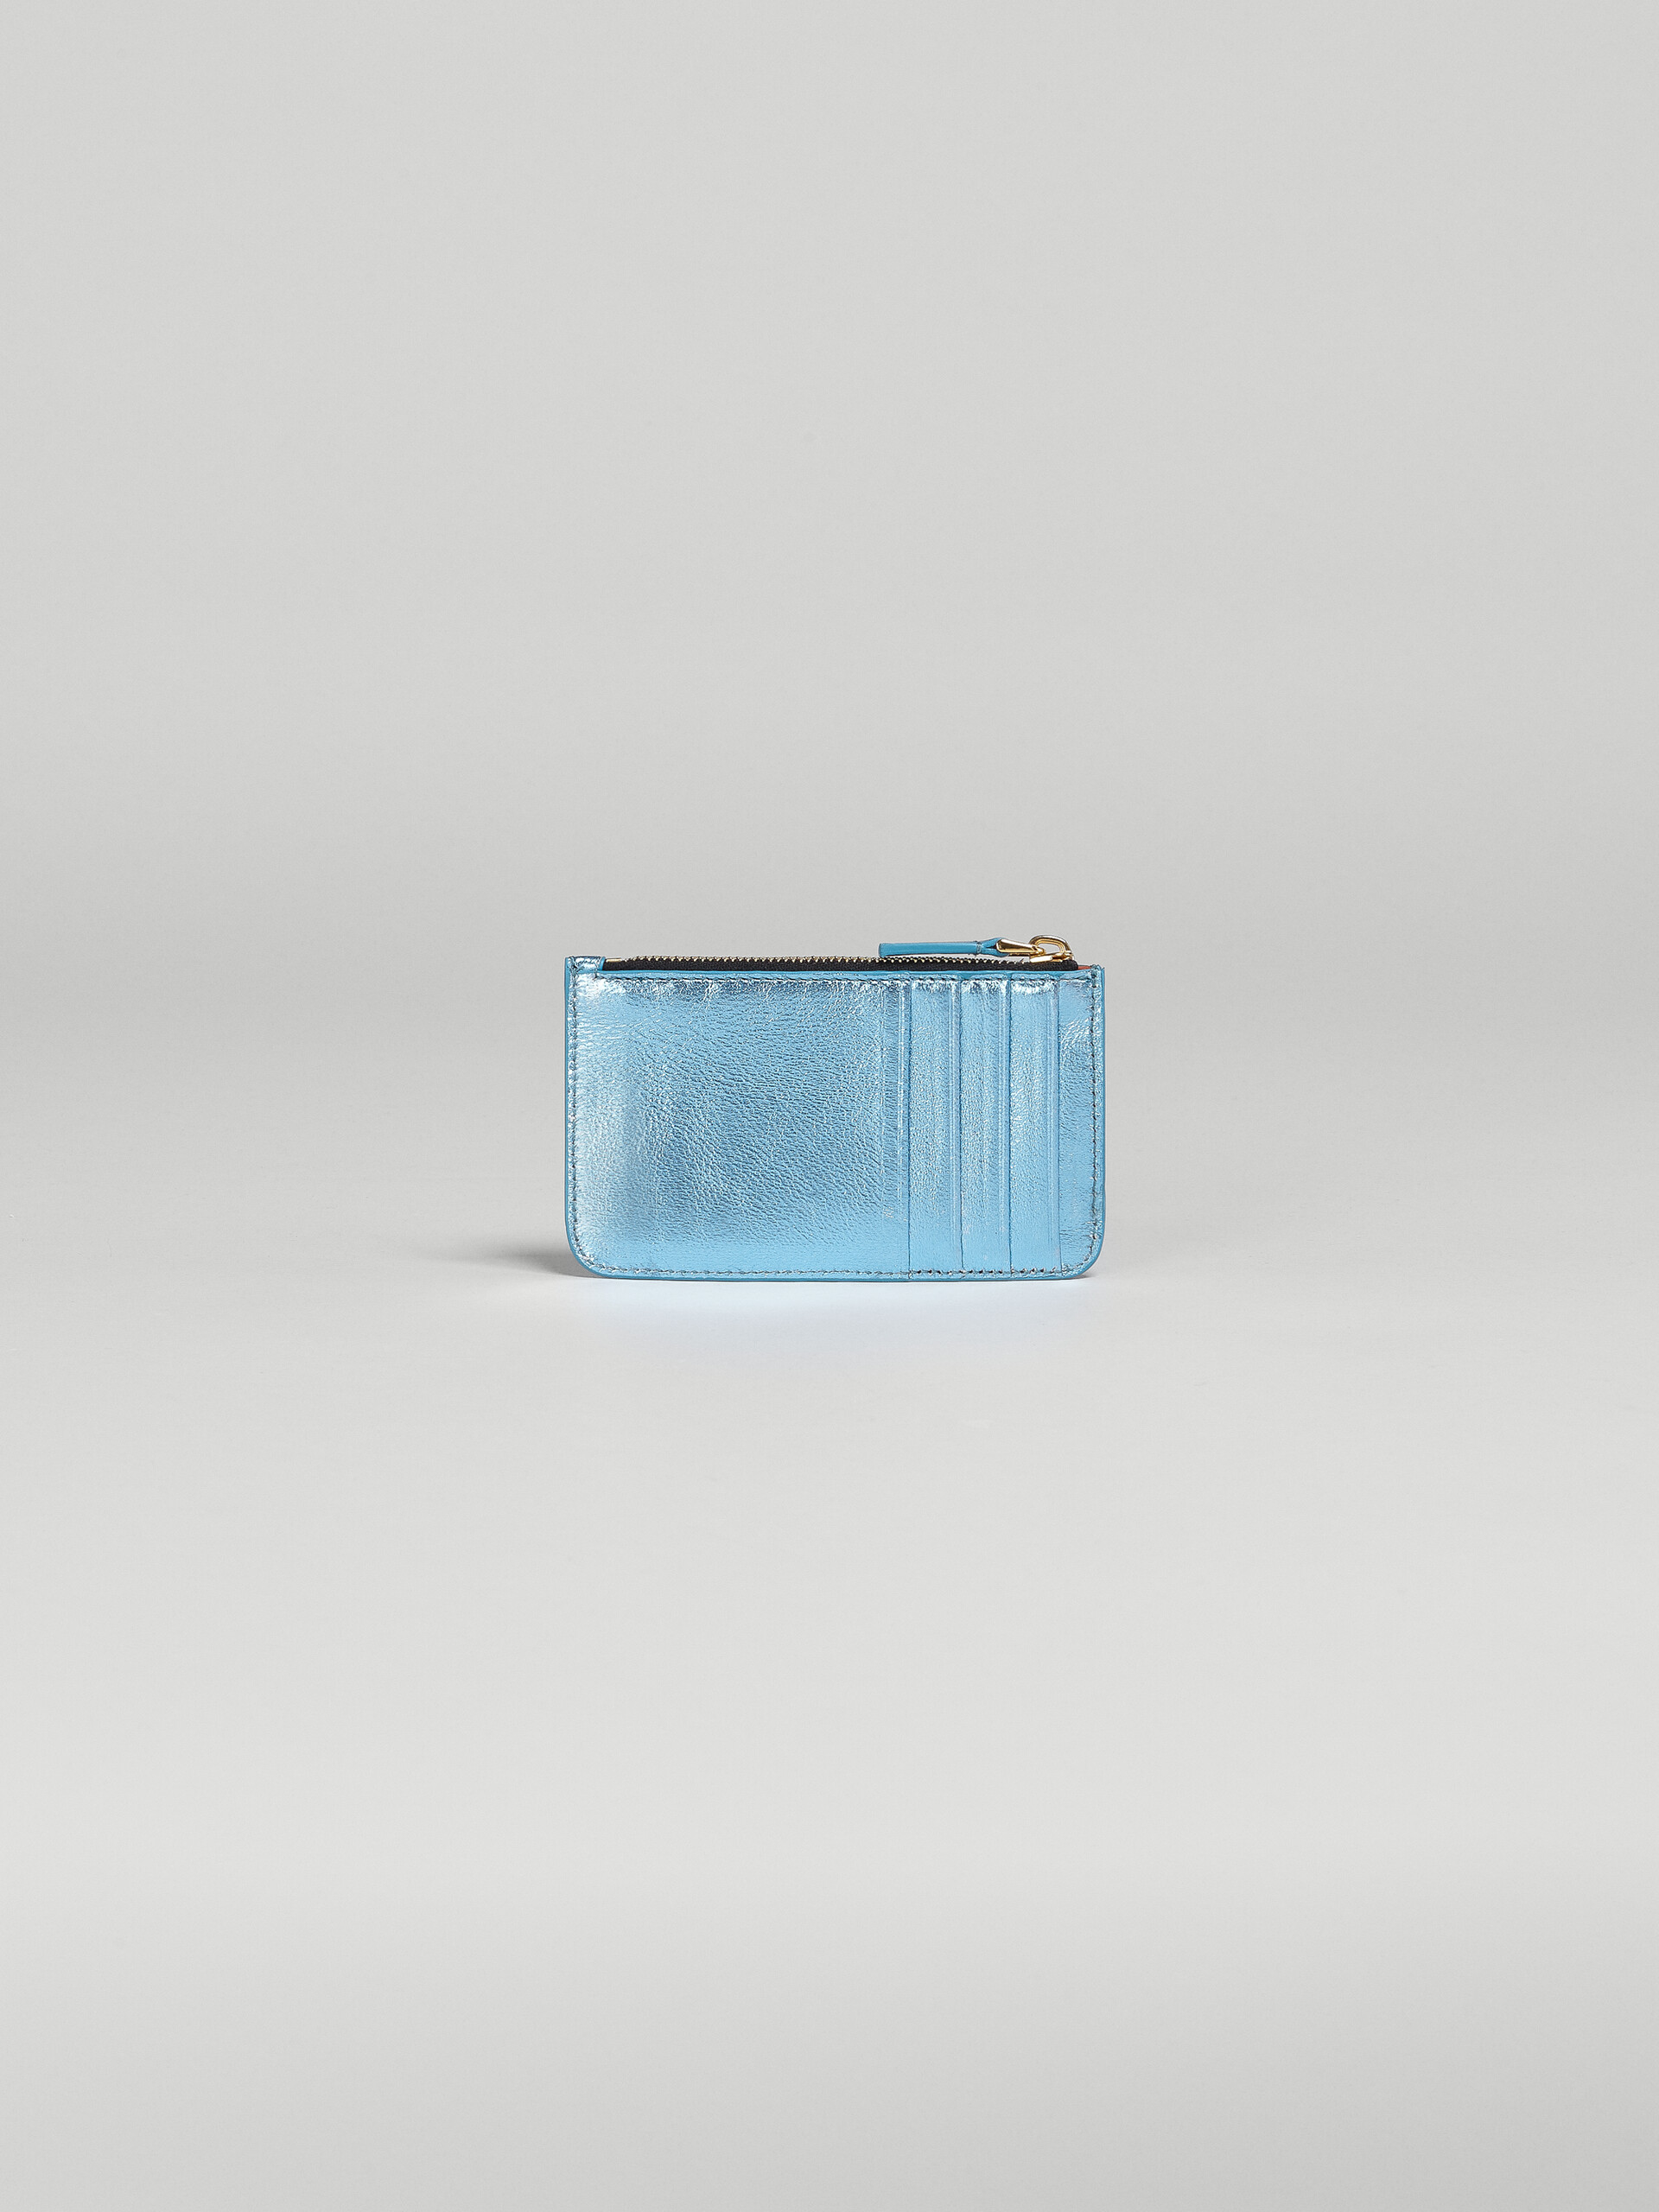 Pale blue metallic nappa leather card case - Wallets - Image 3